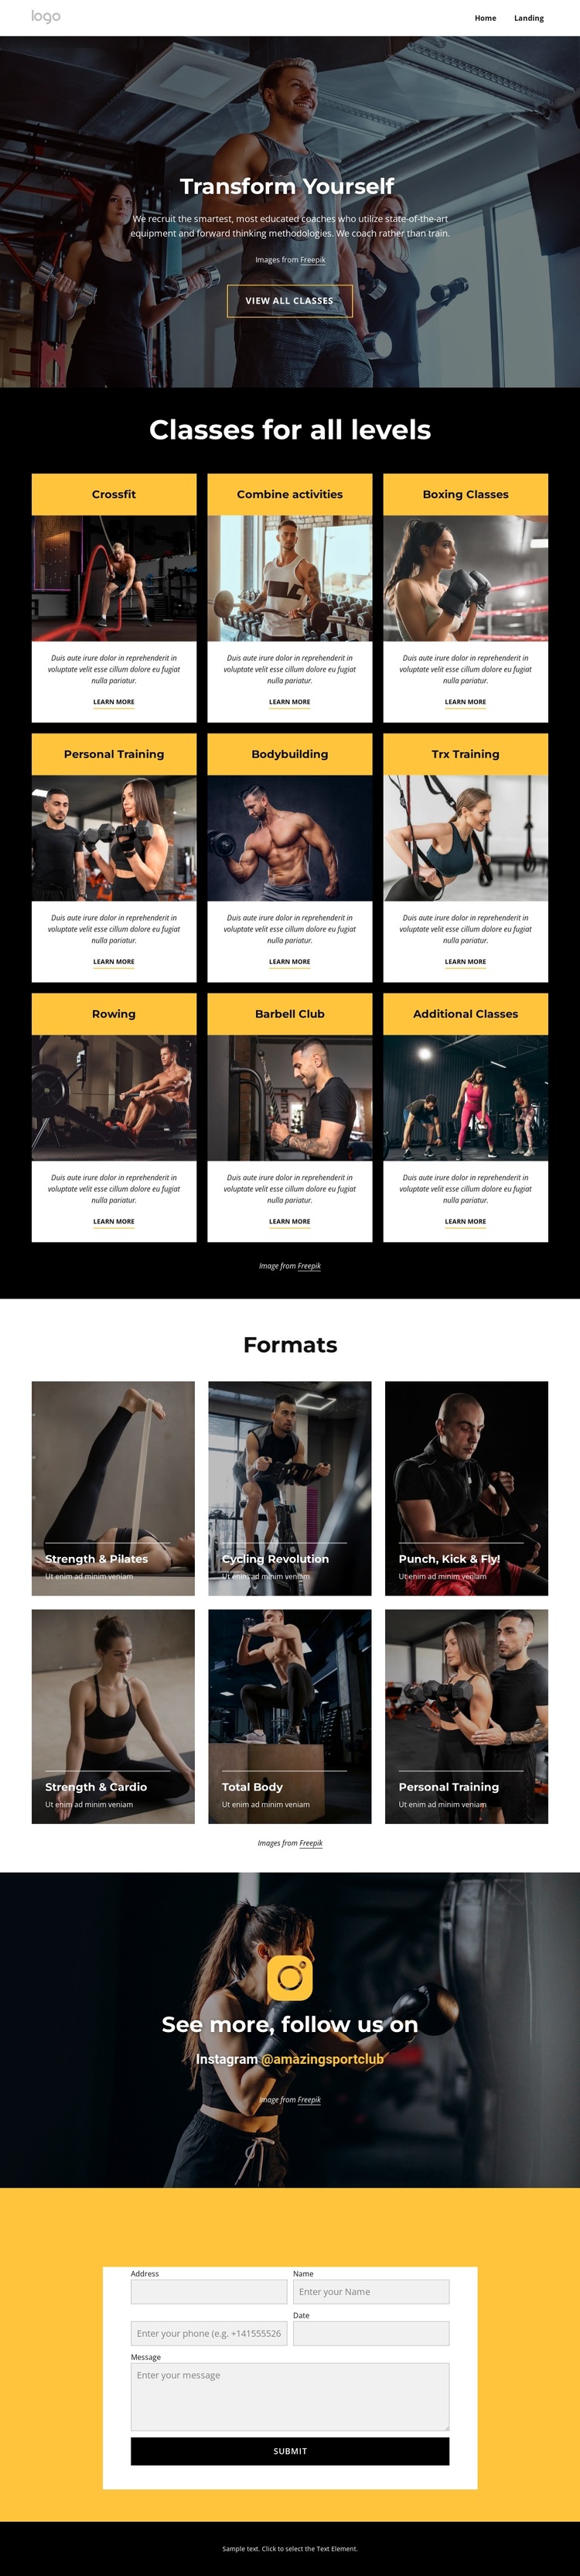 Fitness classes, indoor pools HTML5 Template